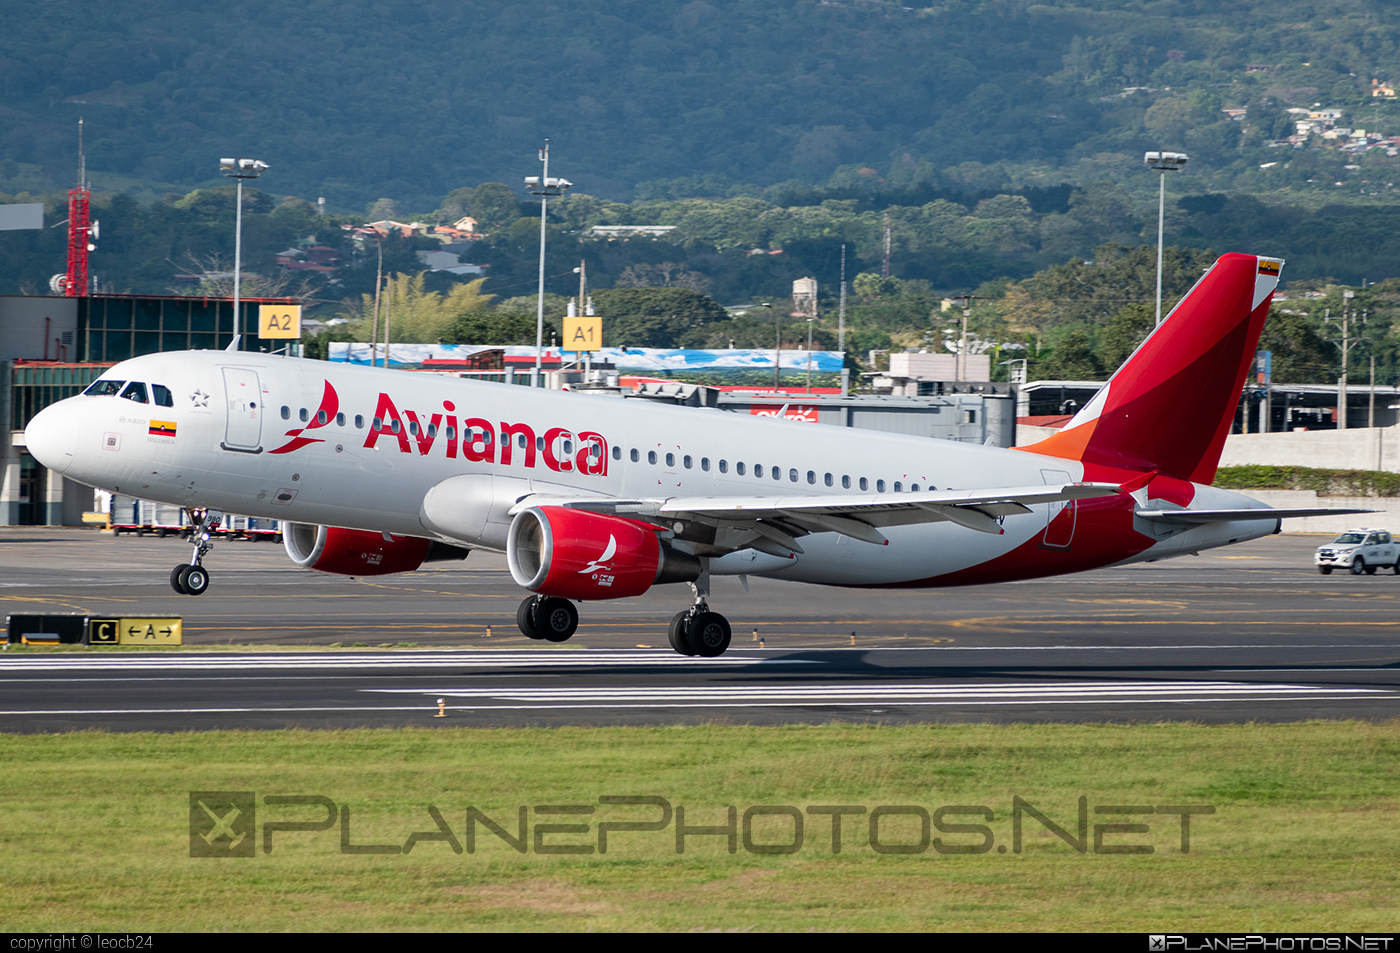 Airbus A320-214 - N980AV operated by Avianca #a320 #a320family #airbus #airbus320 #avianca